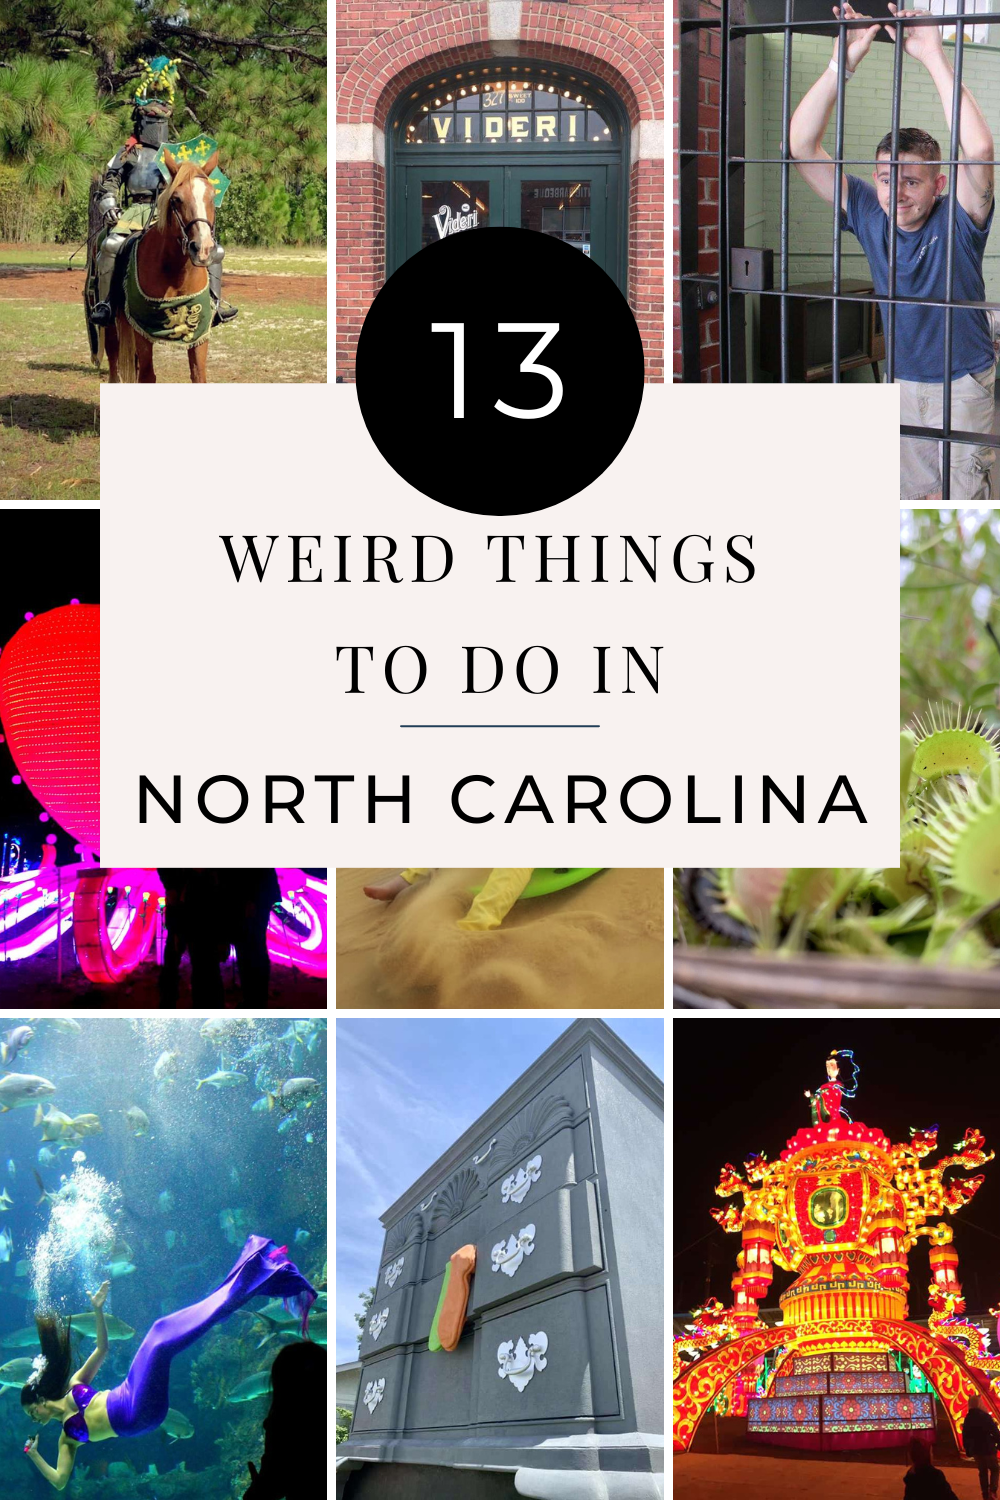 13 Weird Things to do in North Carolina | Finding Mandee